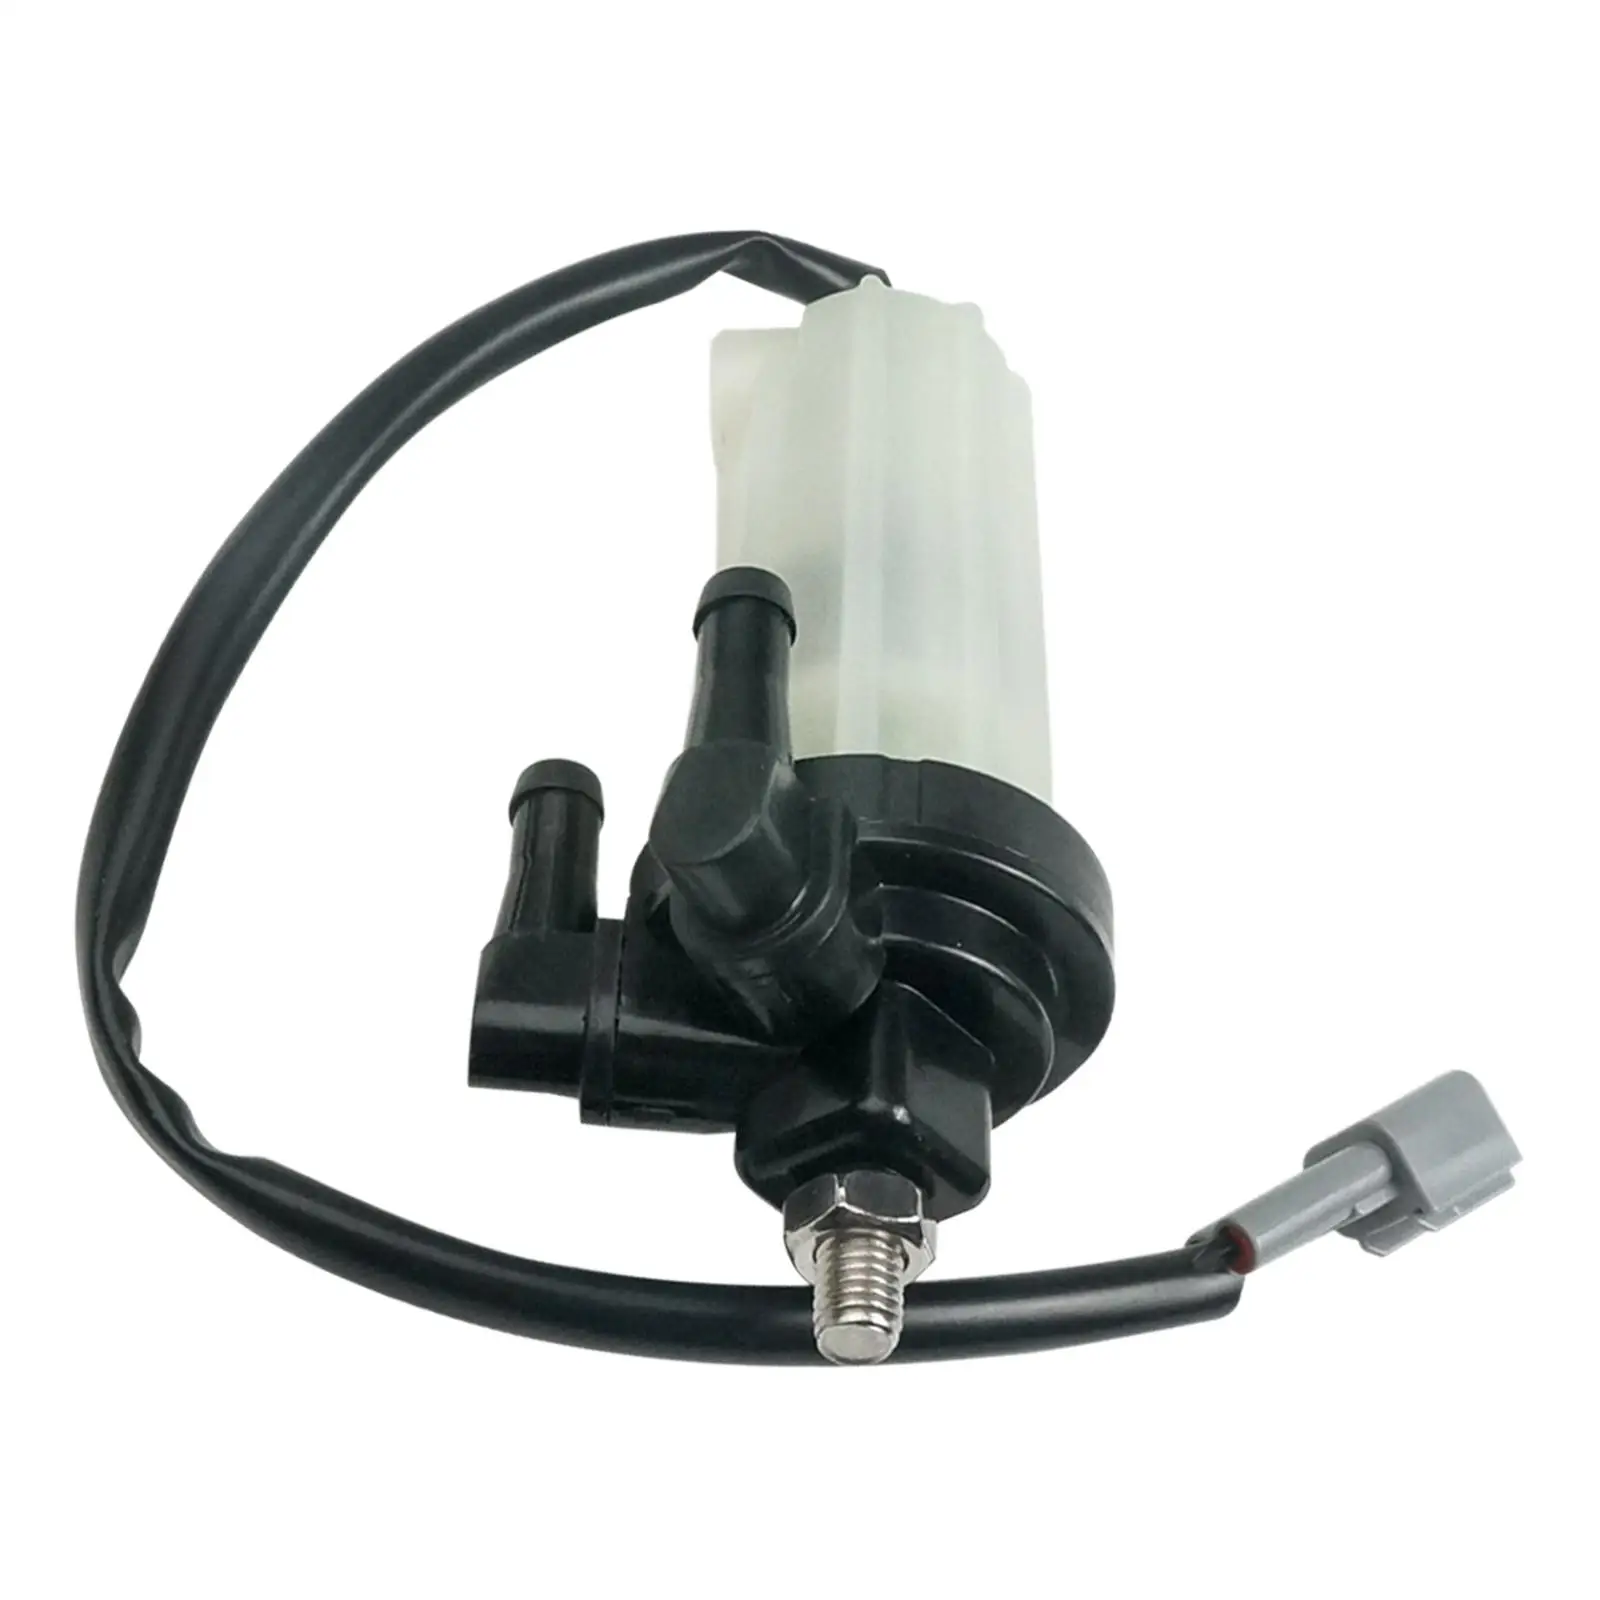 Boat Motor Fuel Filter Assy 6D8-24560-01 Replaces for Yamaha Outboard Motor